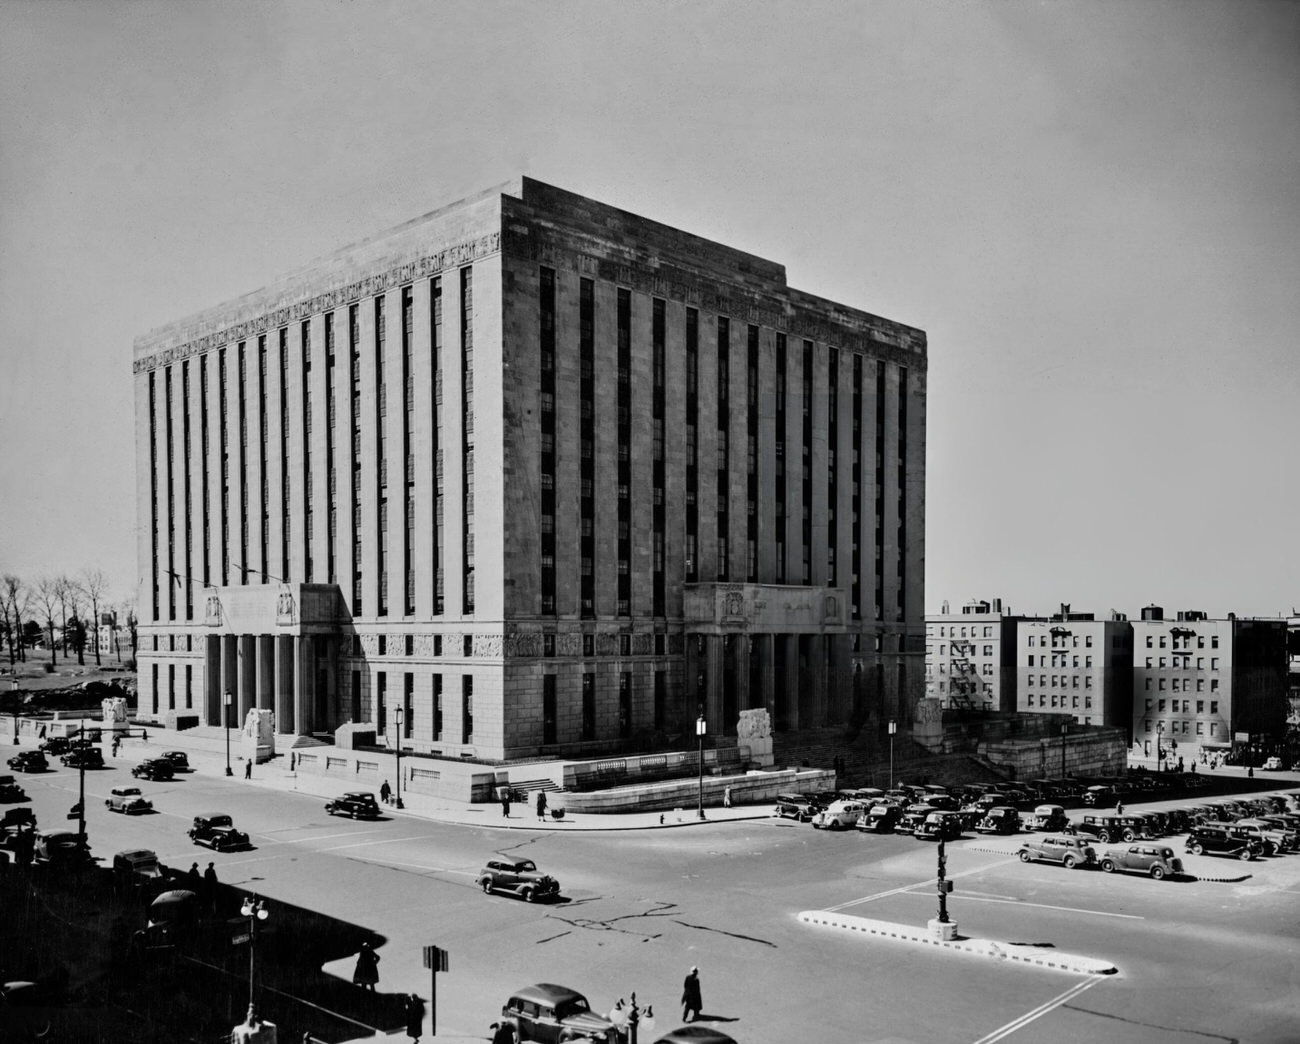 The Bronx County Courthouse, A Classical Revival Building Designed By Joseph H Freelander And Max Hausle In The Concourse And Melrose Neighborhoods, Circa 1945.